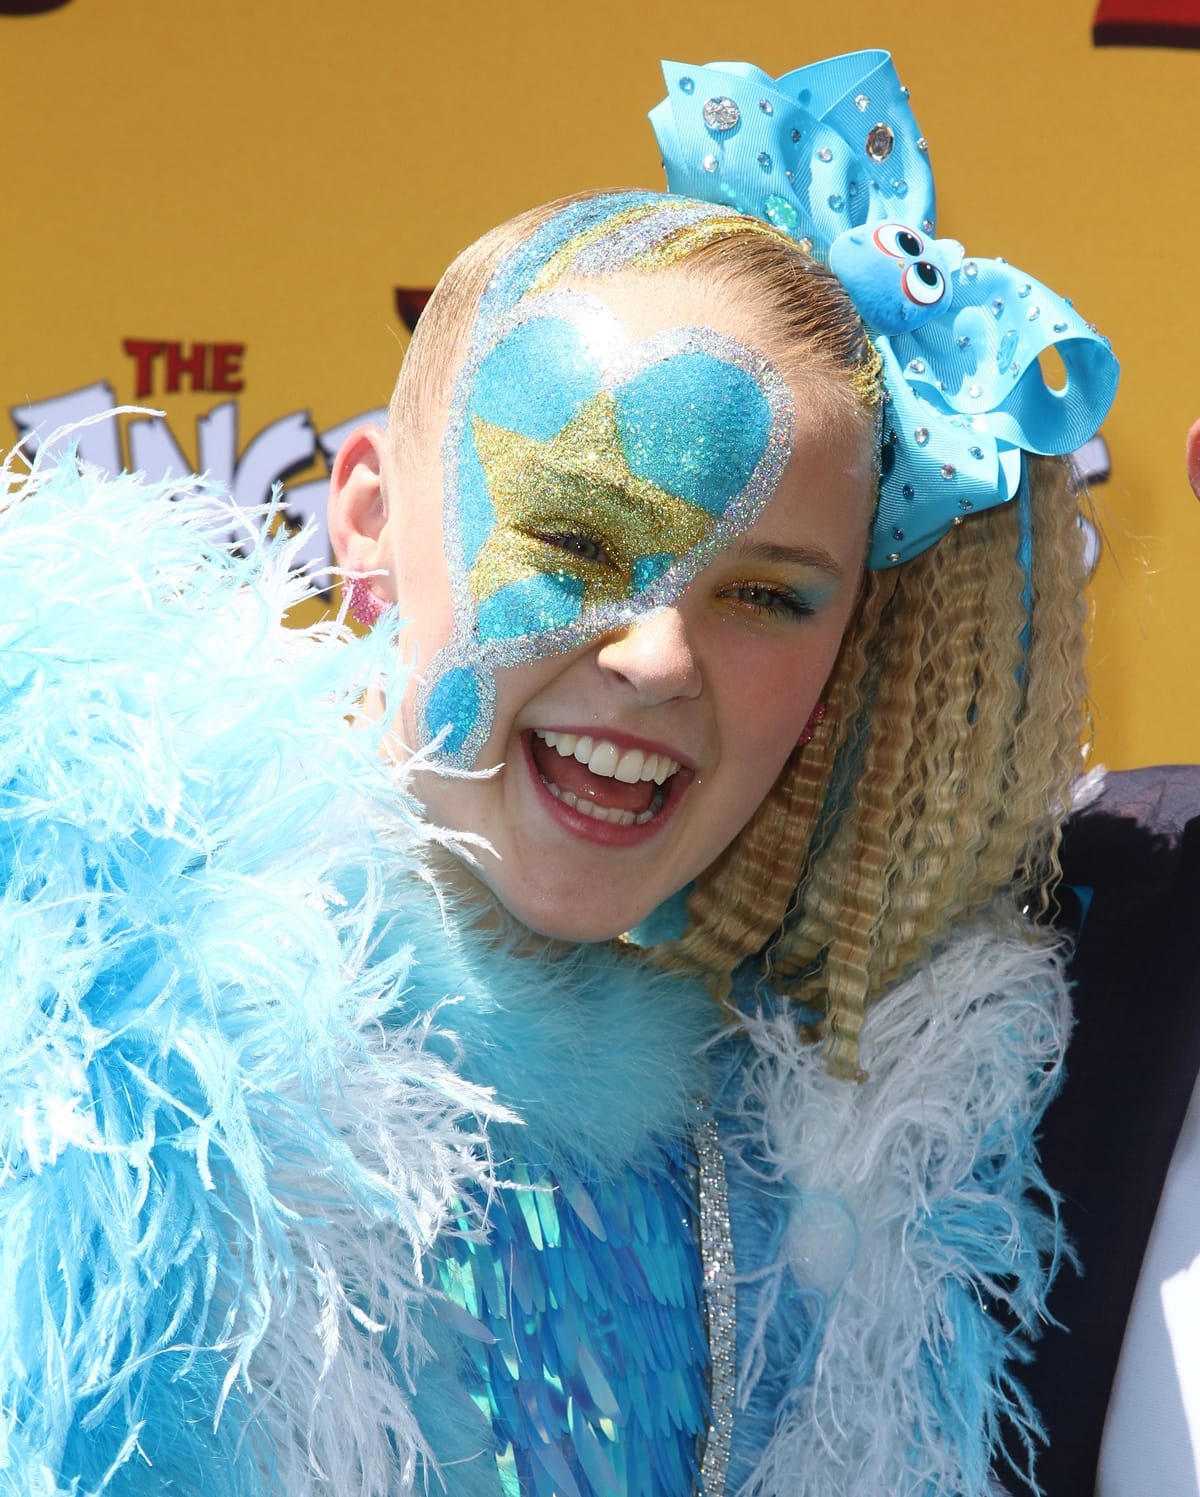 JoJo Siwa came out as being part of the LGBTQ+ community